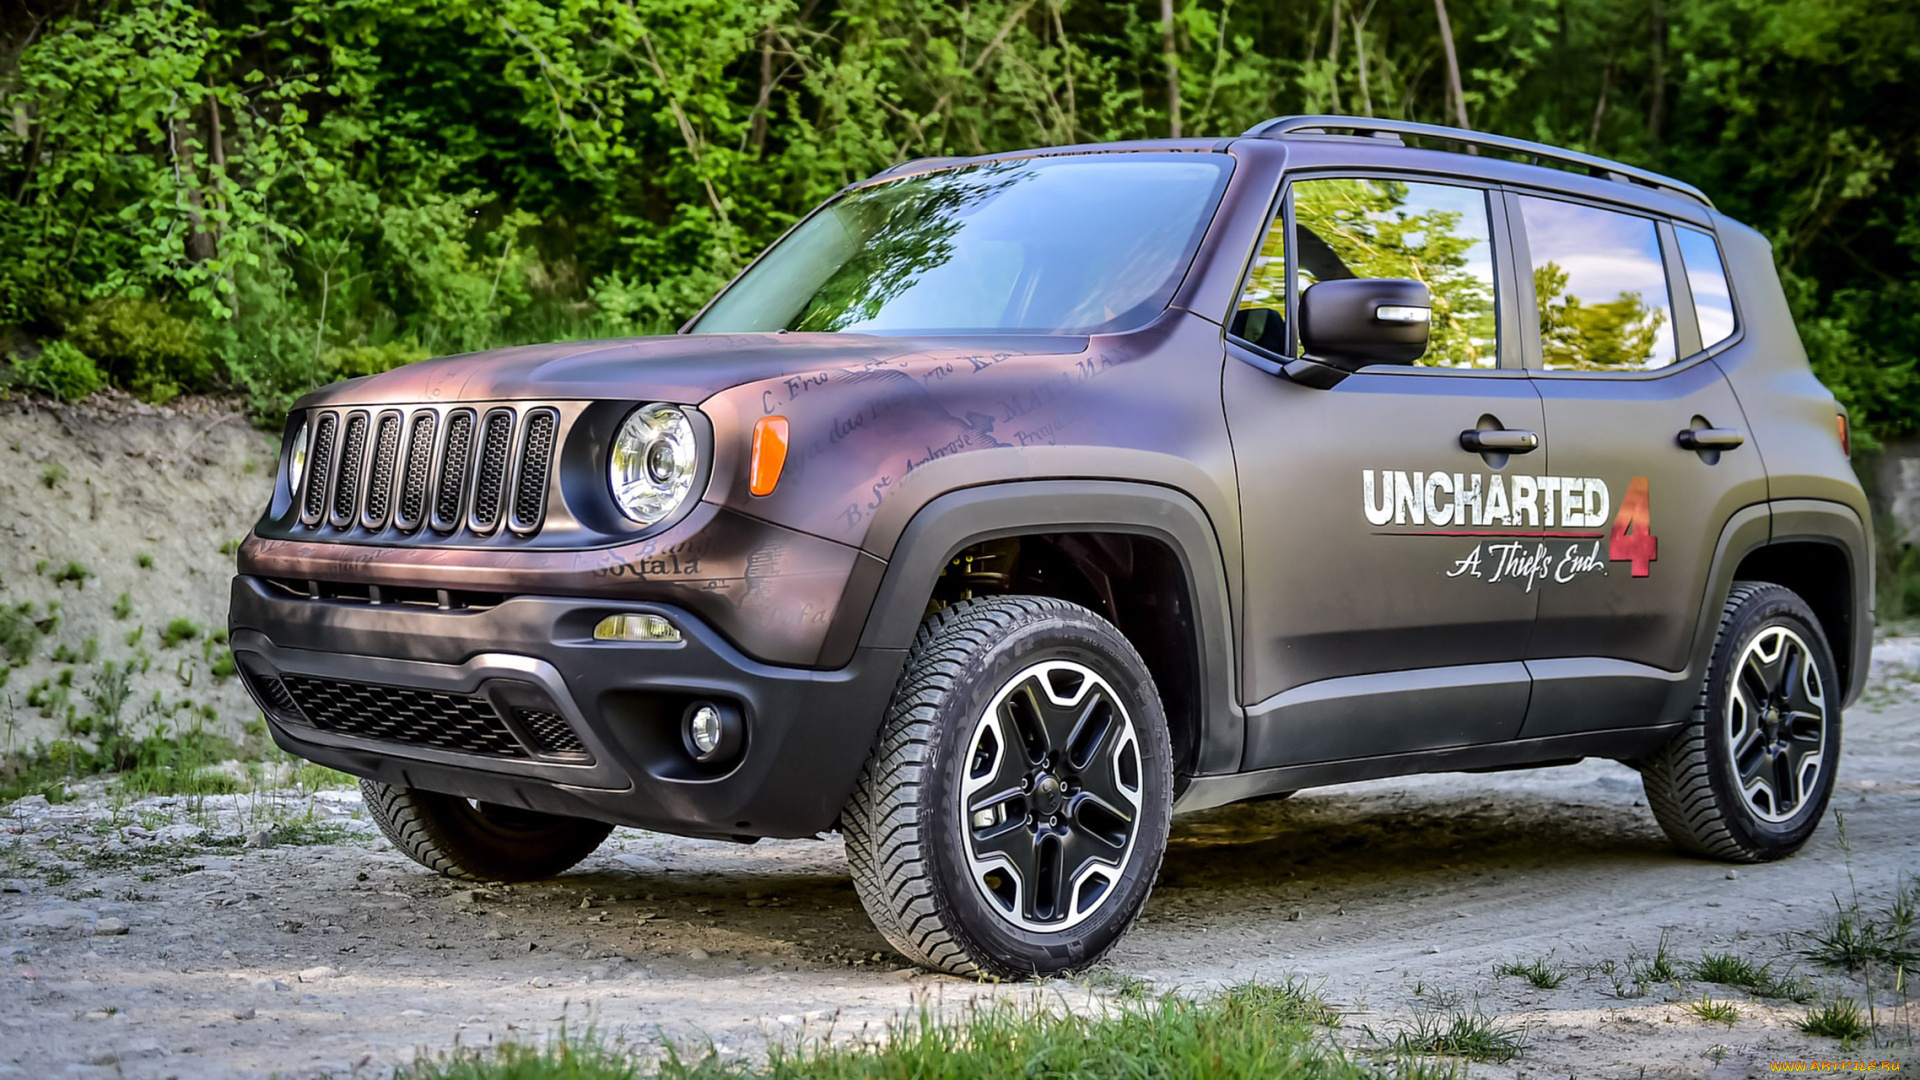 jeep, renegade, uncharted, edition, 2016, автомобили, jeep, 2016, edition, uncharted, renegade